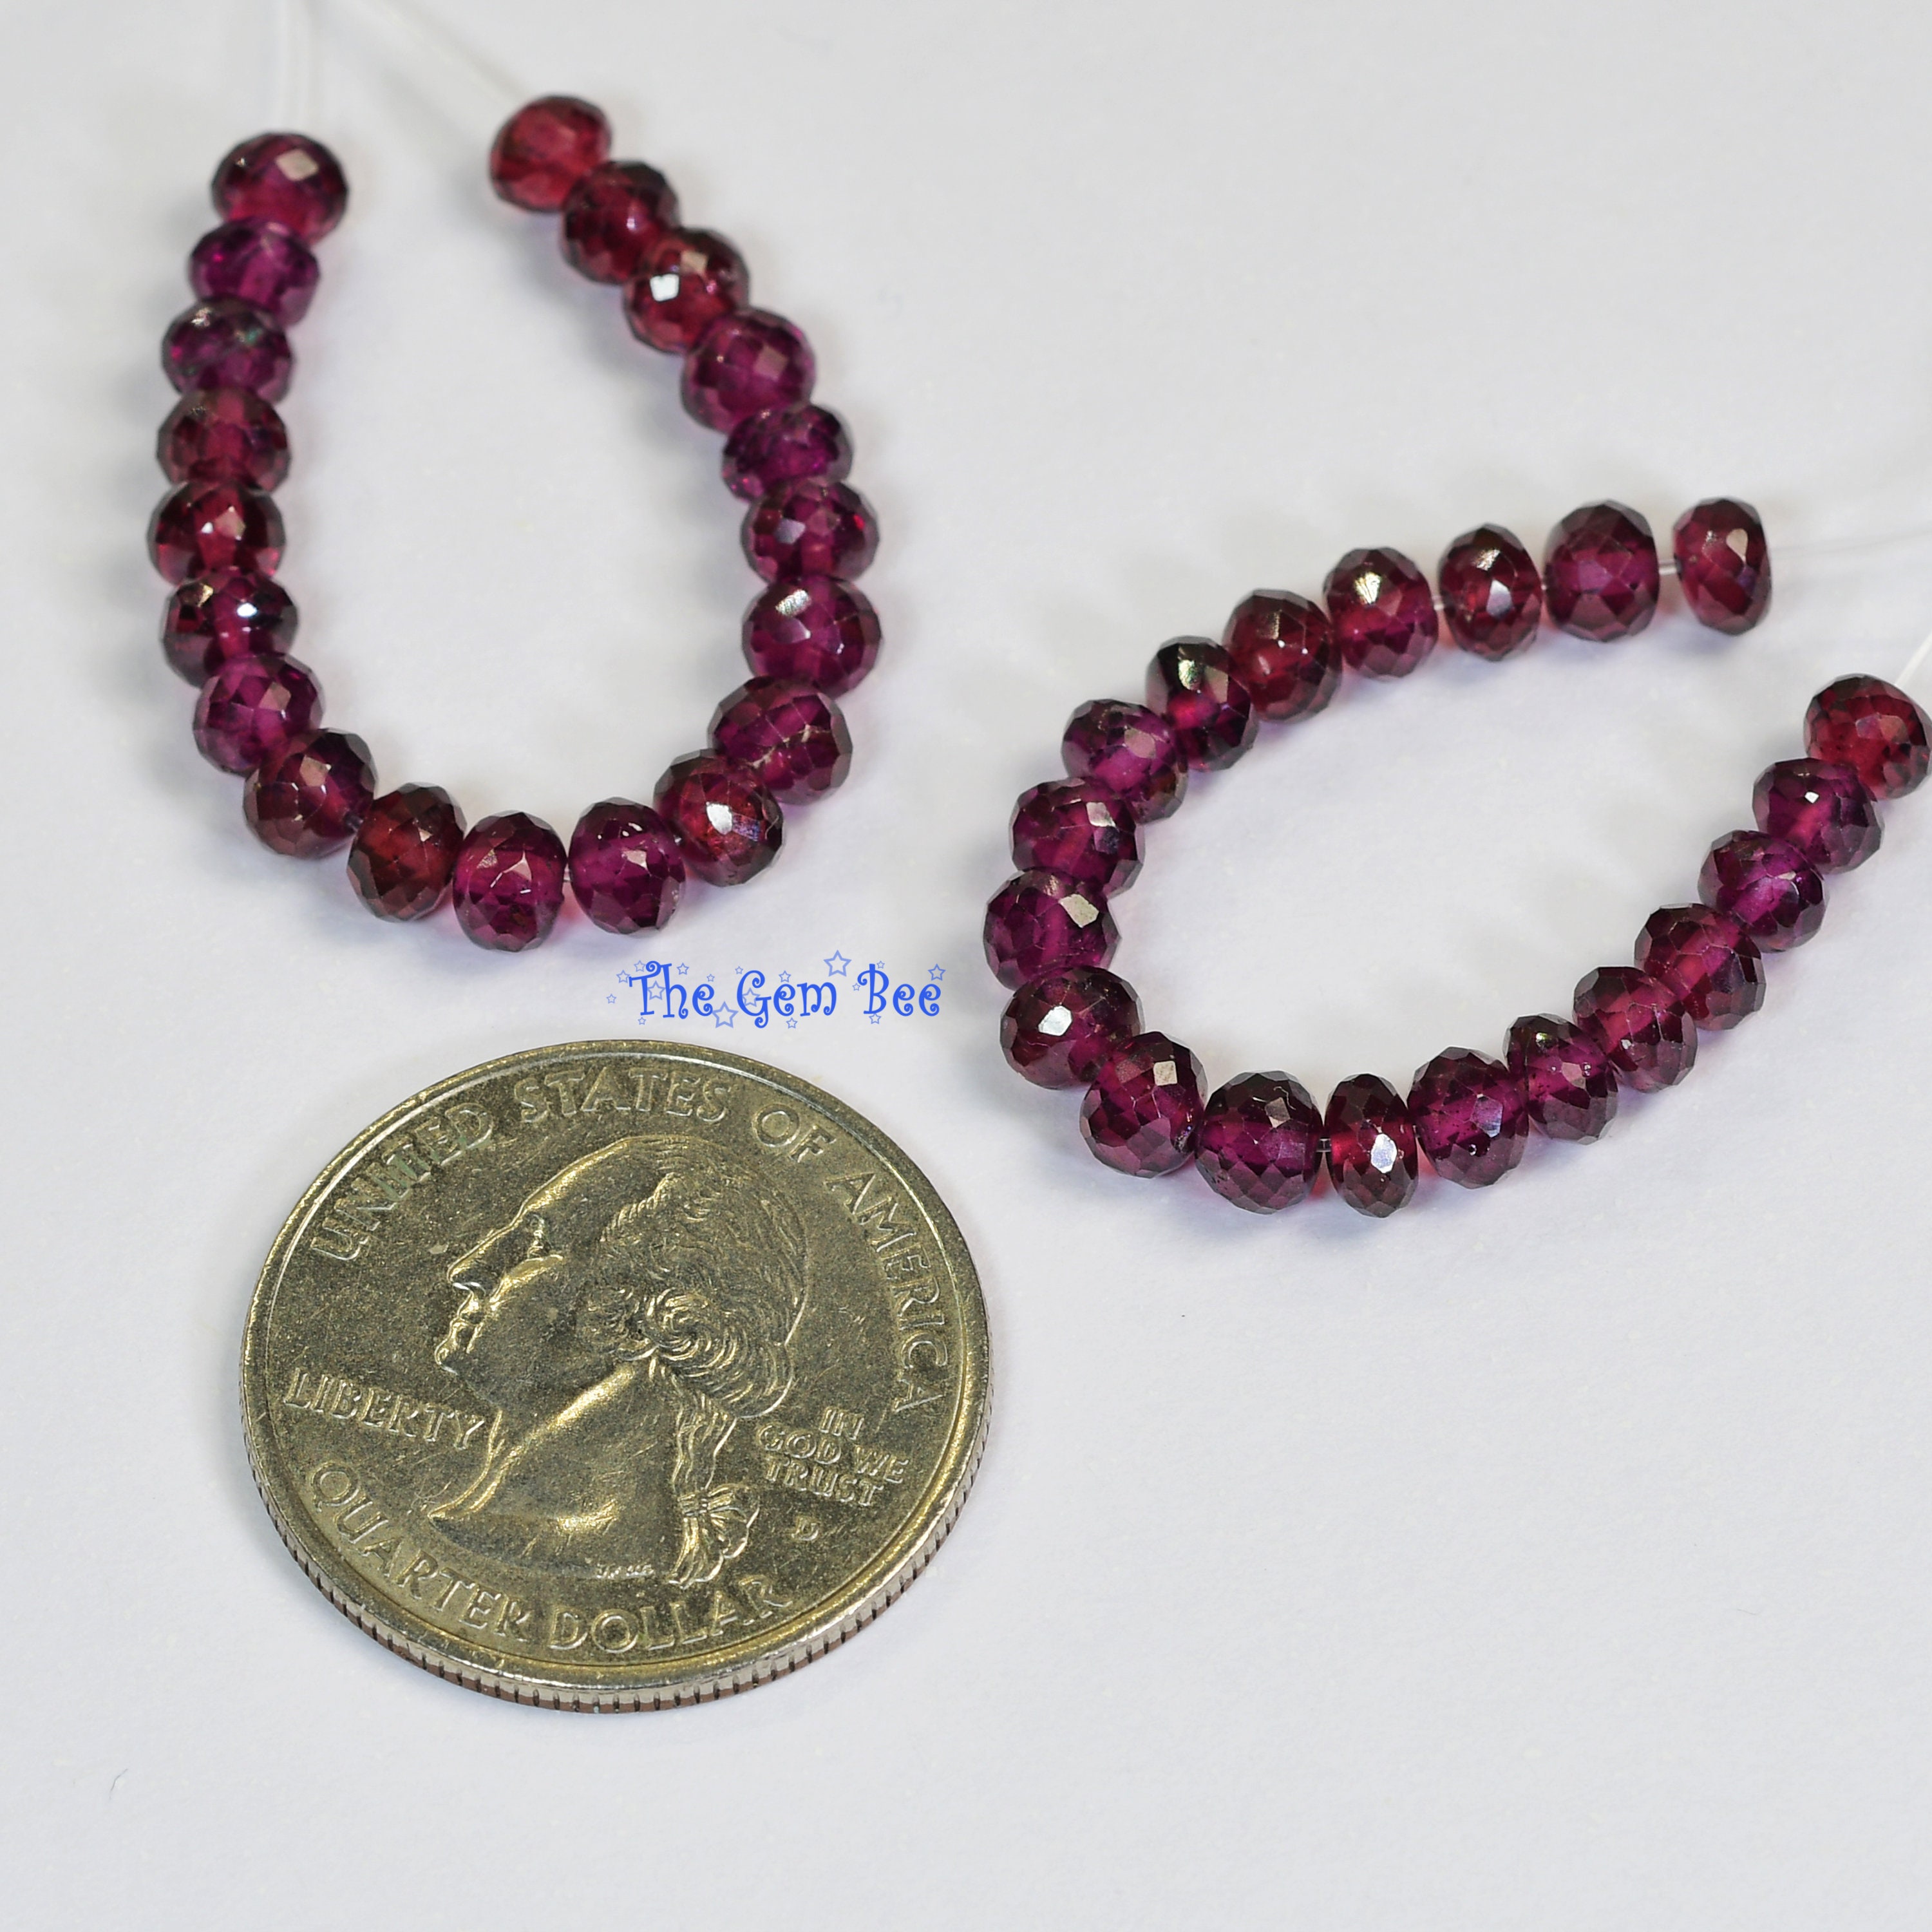 Buy Sample of 7 (Seven) Beads of TSAVORITE Garnet Faceted Roundel Beads  3287 Spacer Beads and Roll Crystal String for Bracelets Jewelry Making  Online at desertcartCosta Rica